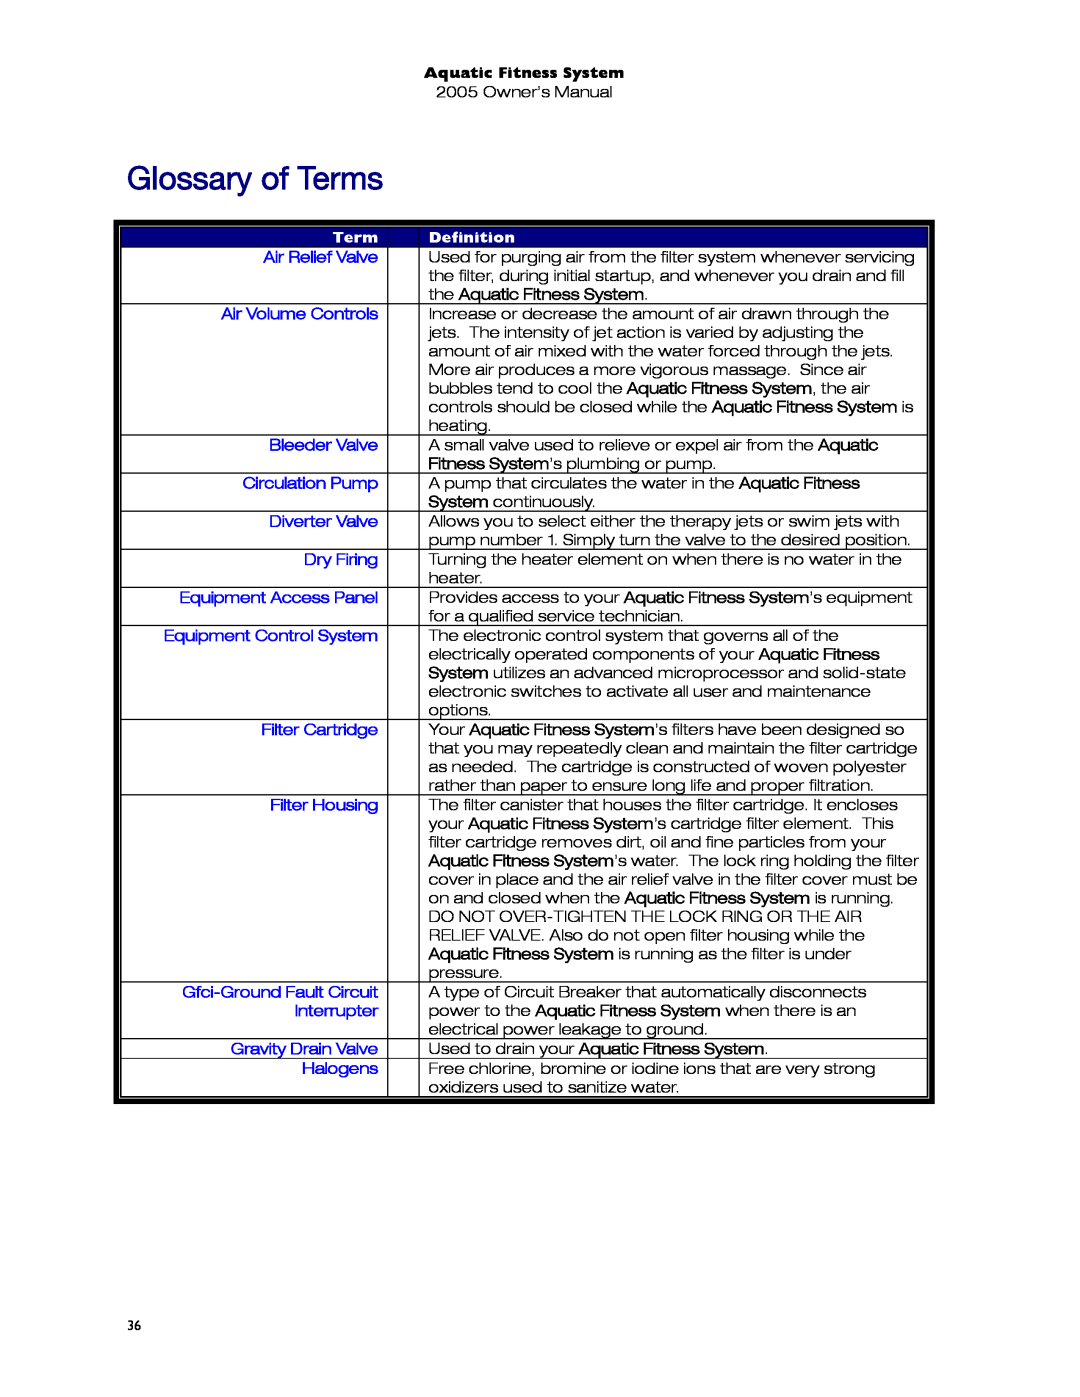 Dimension One Spas 01513-192 manual Glossary of Terms, Definition, the Aquatic Fitness System 